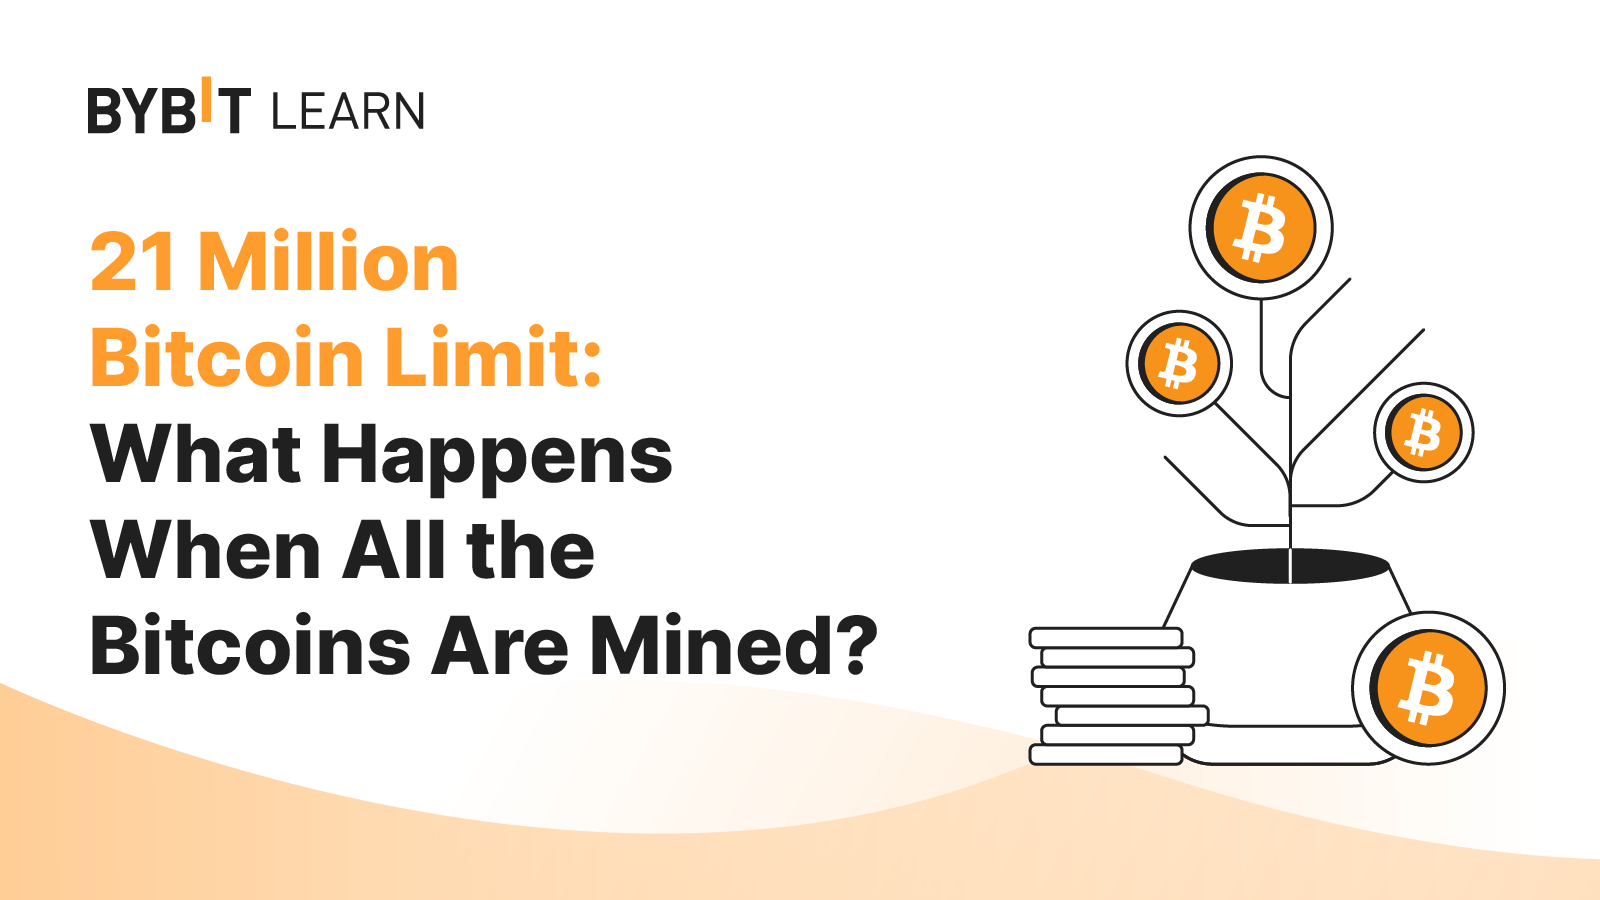 What Will Happen When All Bitcoins are Mined?